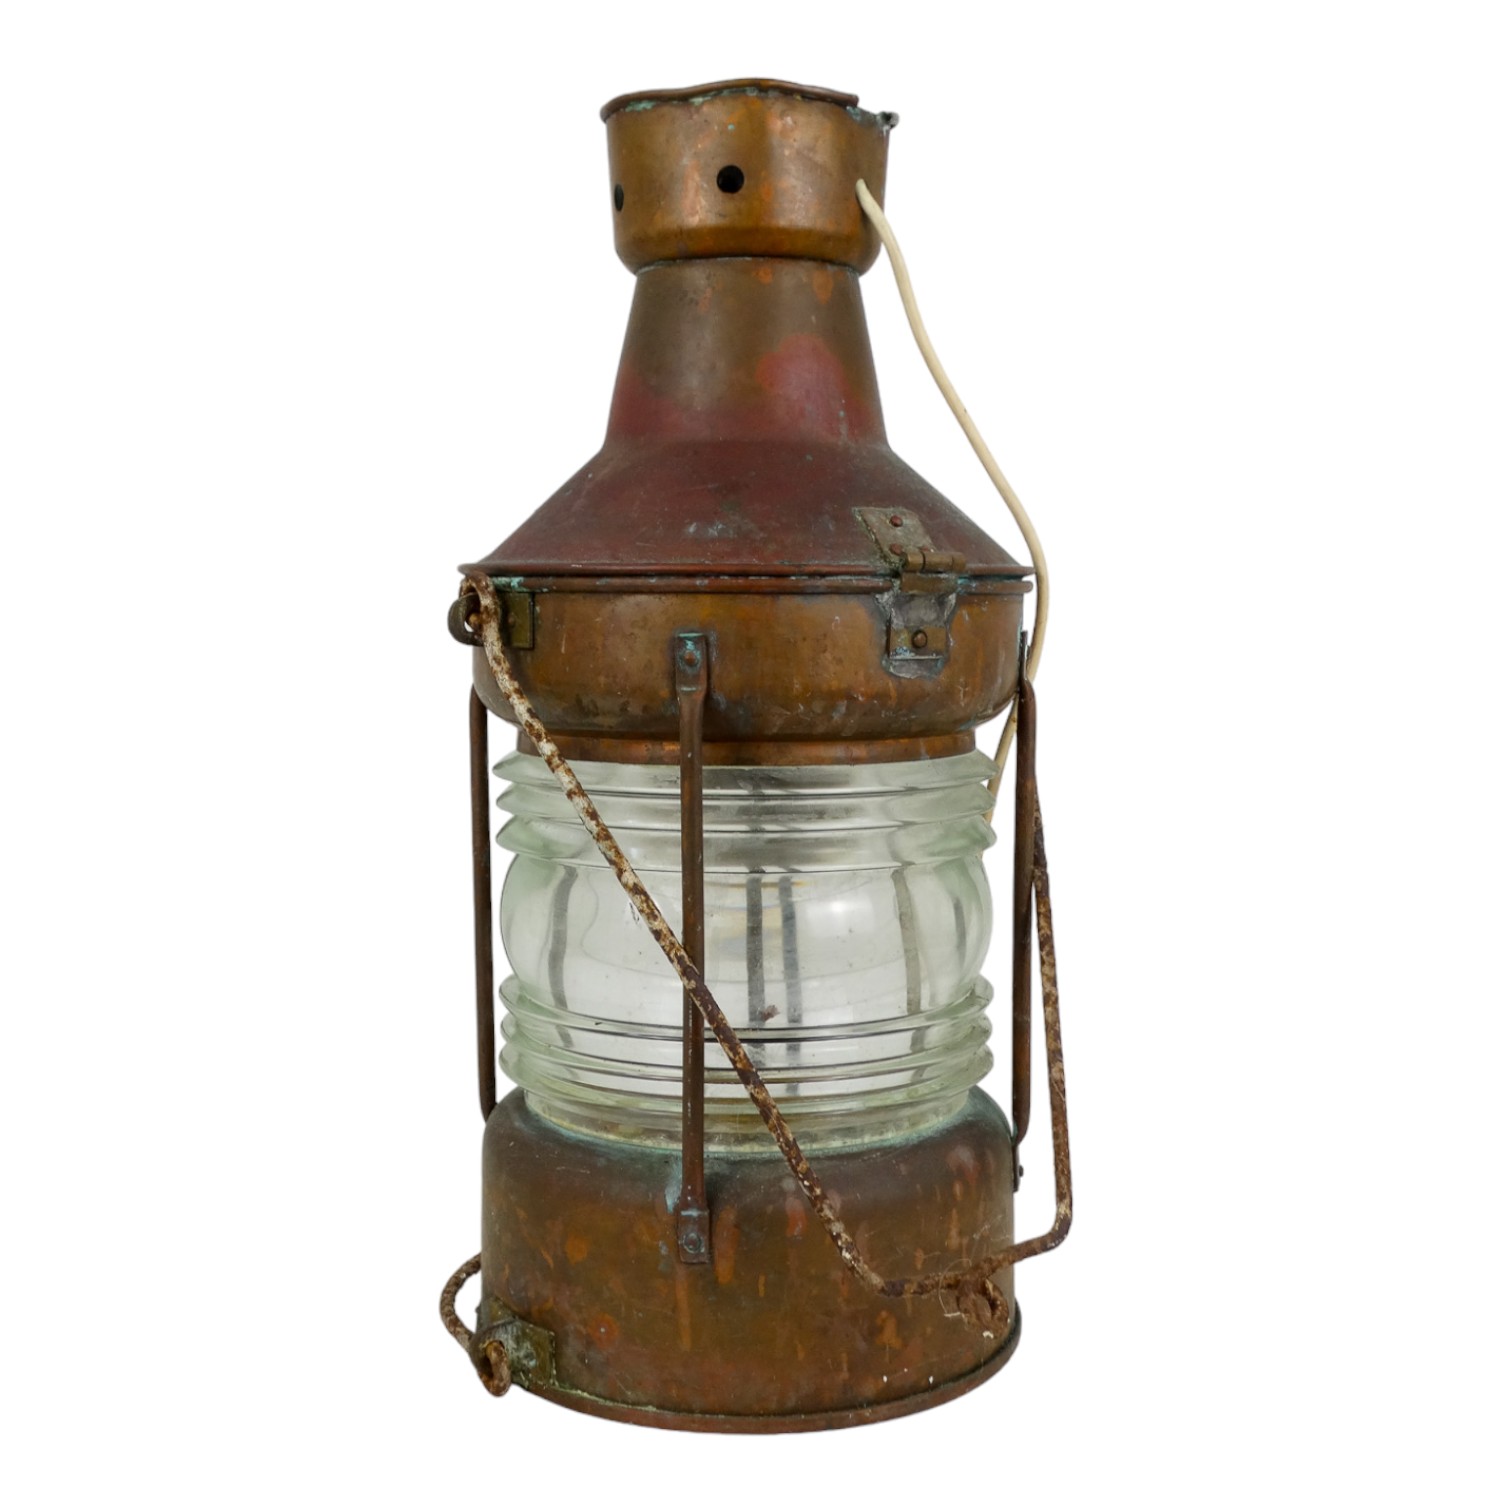 An early 20th century masthead light by H. Henriksen - copper with wrought steel handles, - Image 3 of 5